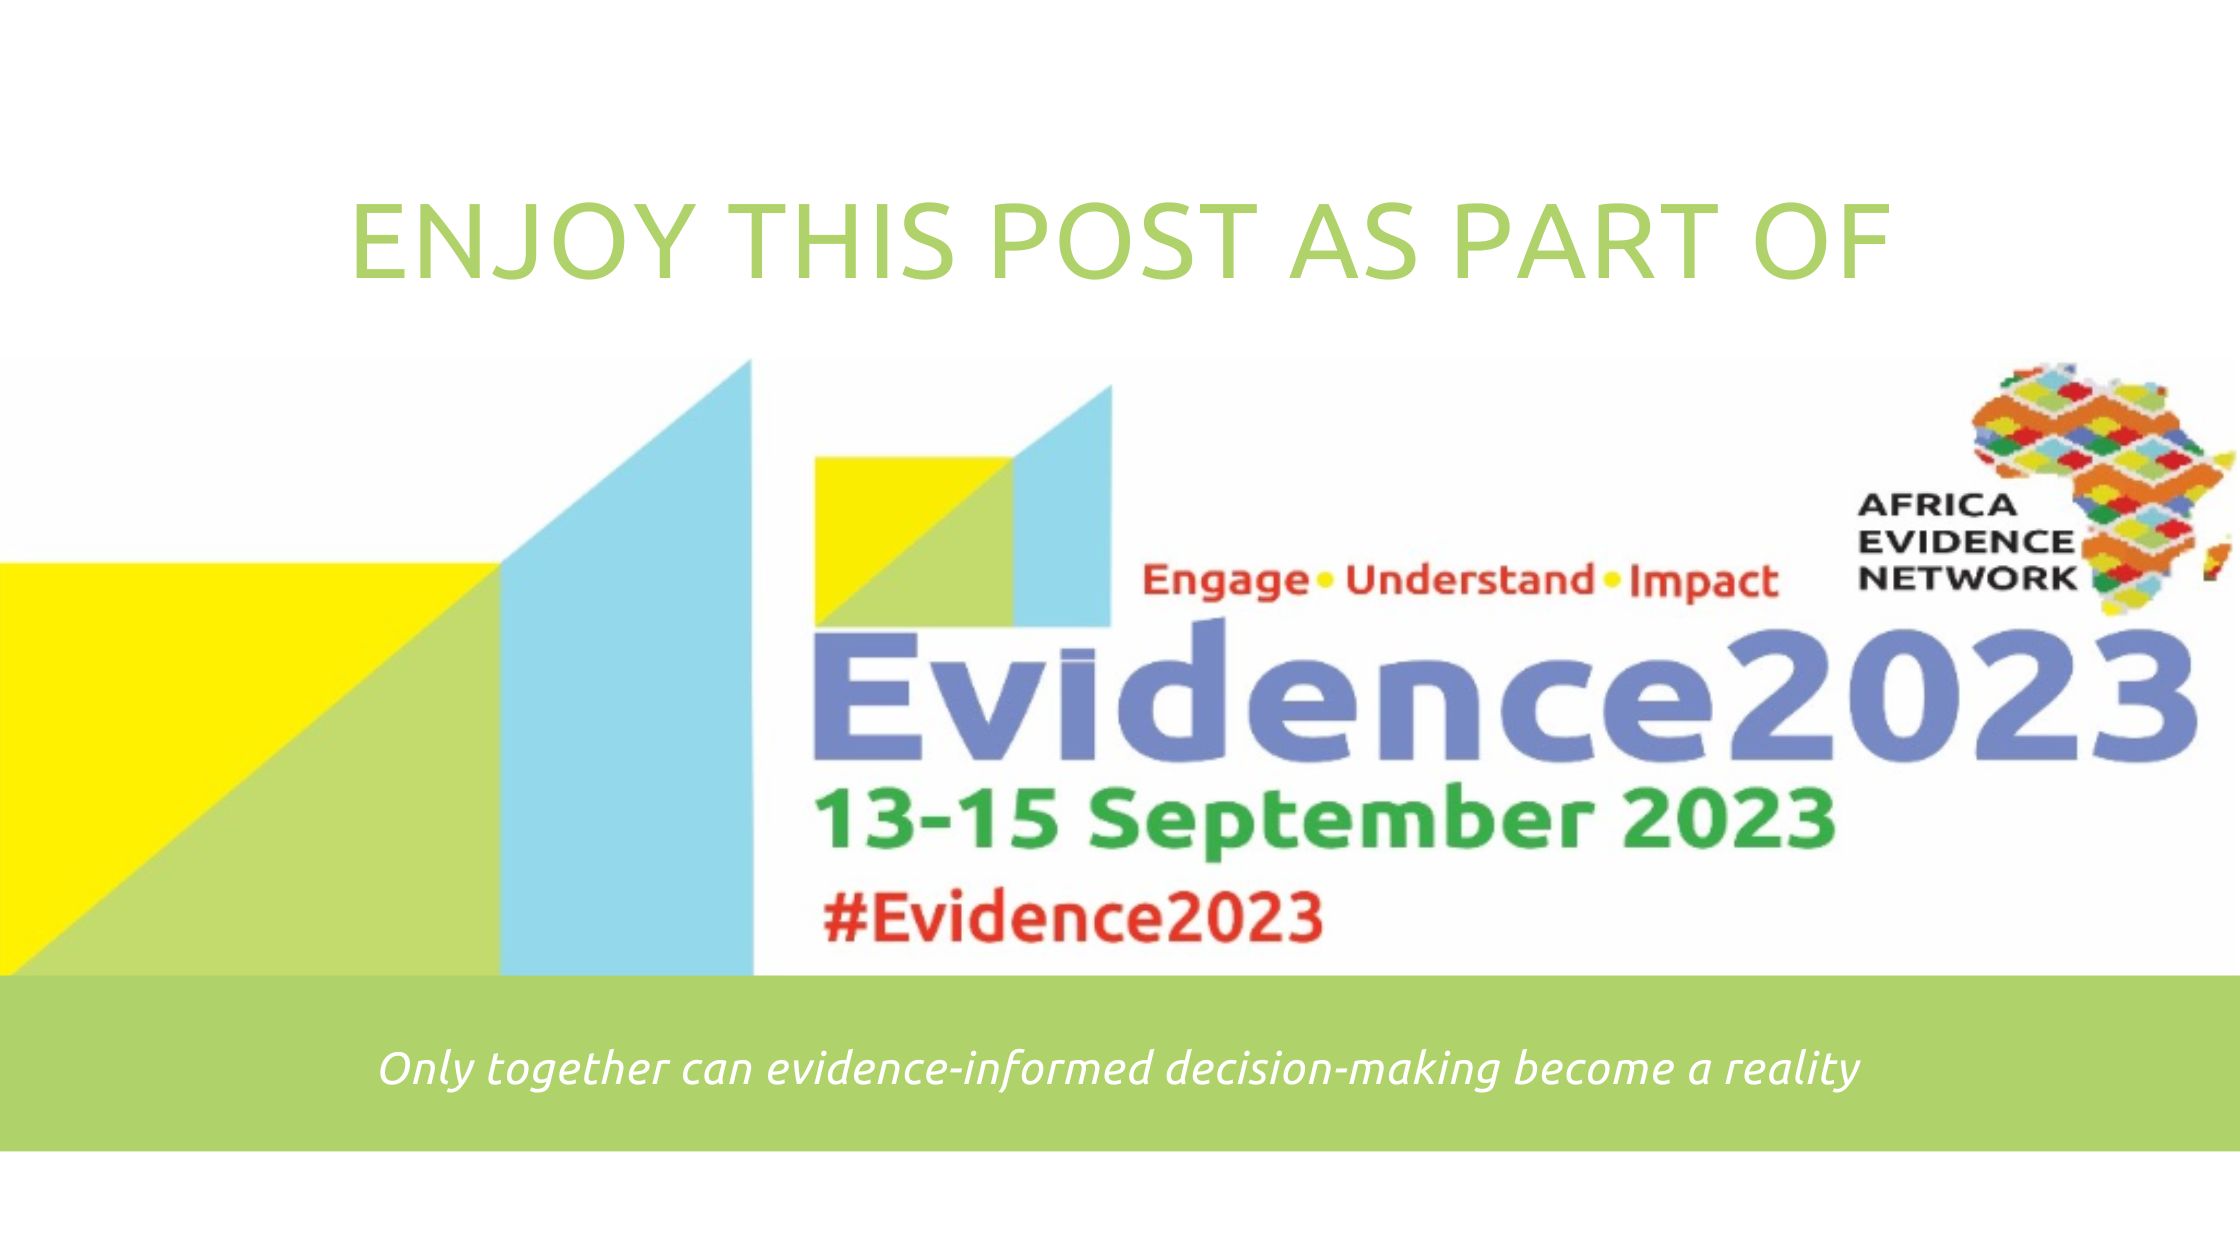 Session 18: Building and cross-fertilizing evidence from National Evaluation Capacities Index